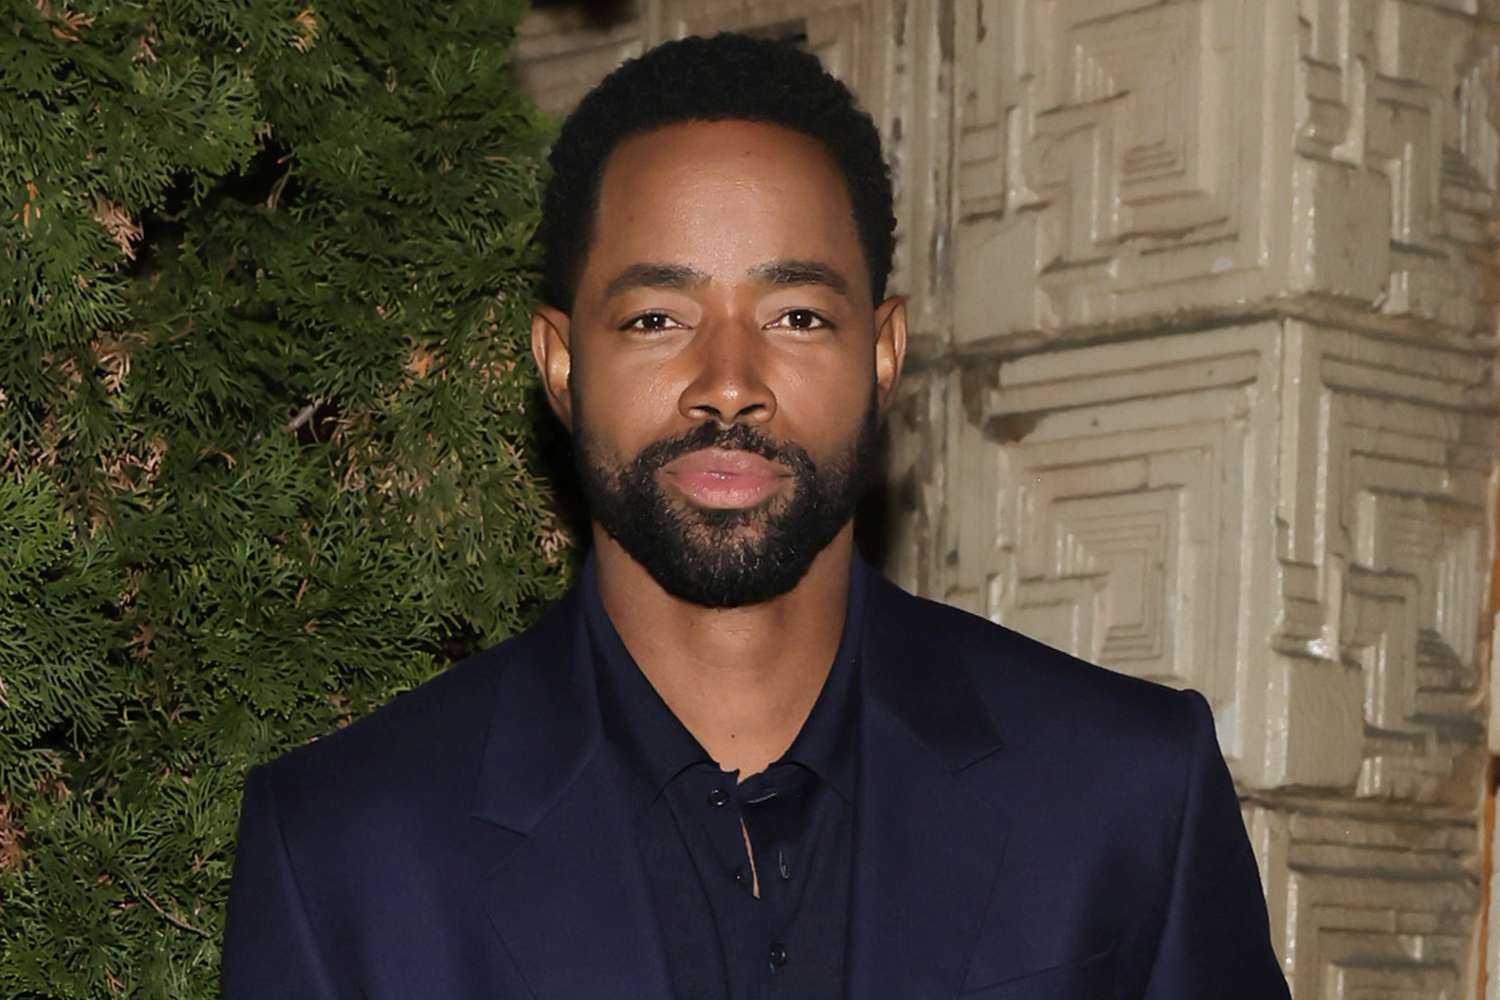 'Insecure' 's Jay Ellis Is Both ‘Terrified’ and 'Excited’ About Baby No. 2: 'Chaos All Over Again’ (Exclusive)